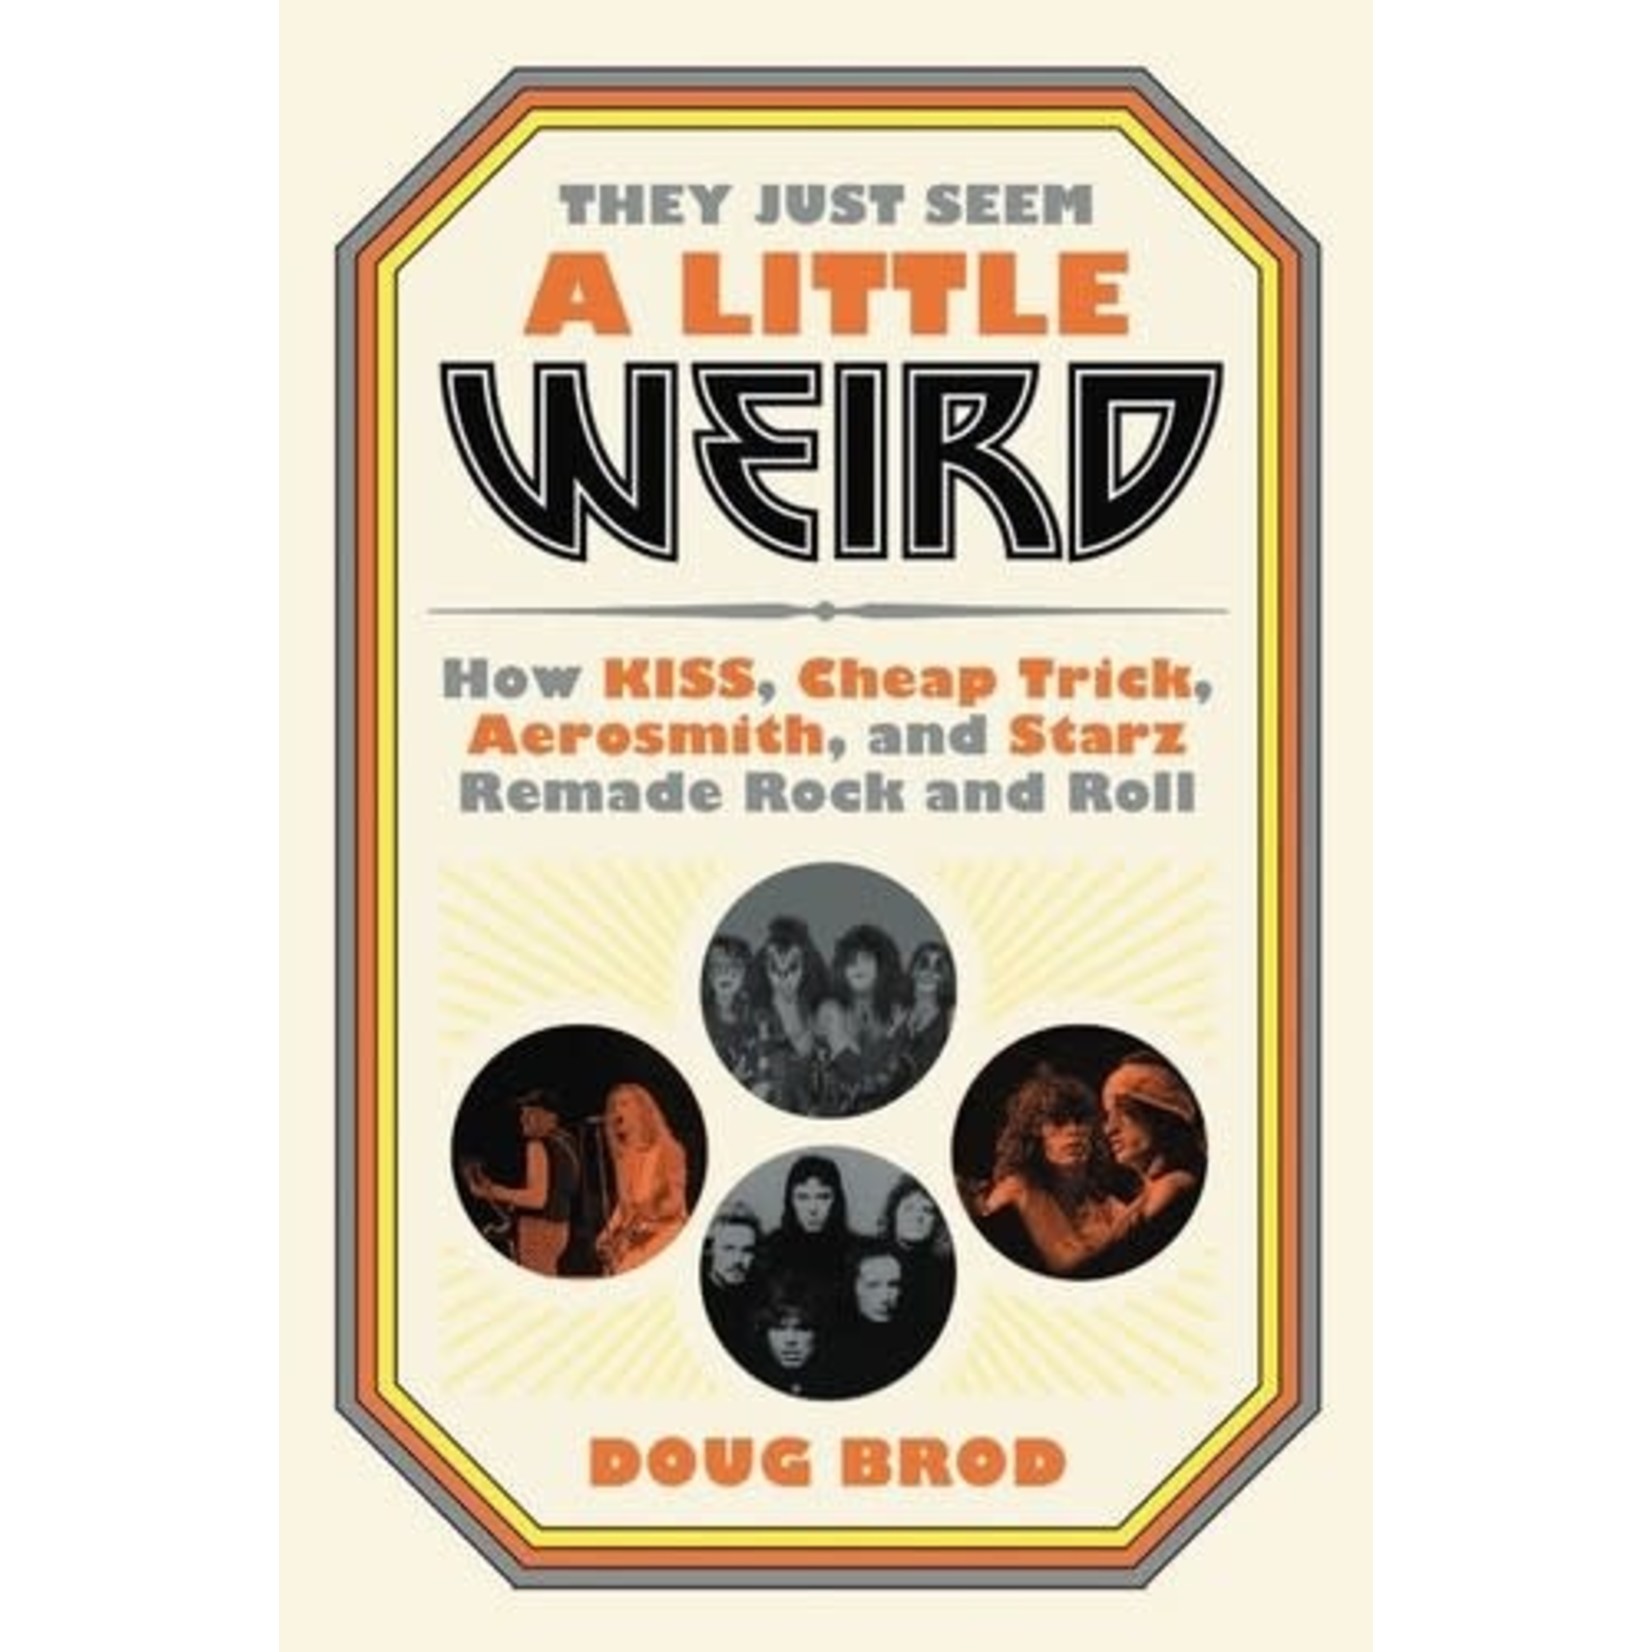 They Just Seem a Little Weird: How KISS, Cheap Trick, Aerosmith, and Starz Remade Rock and Roll (Book)